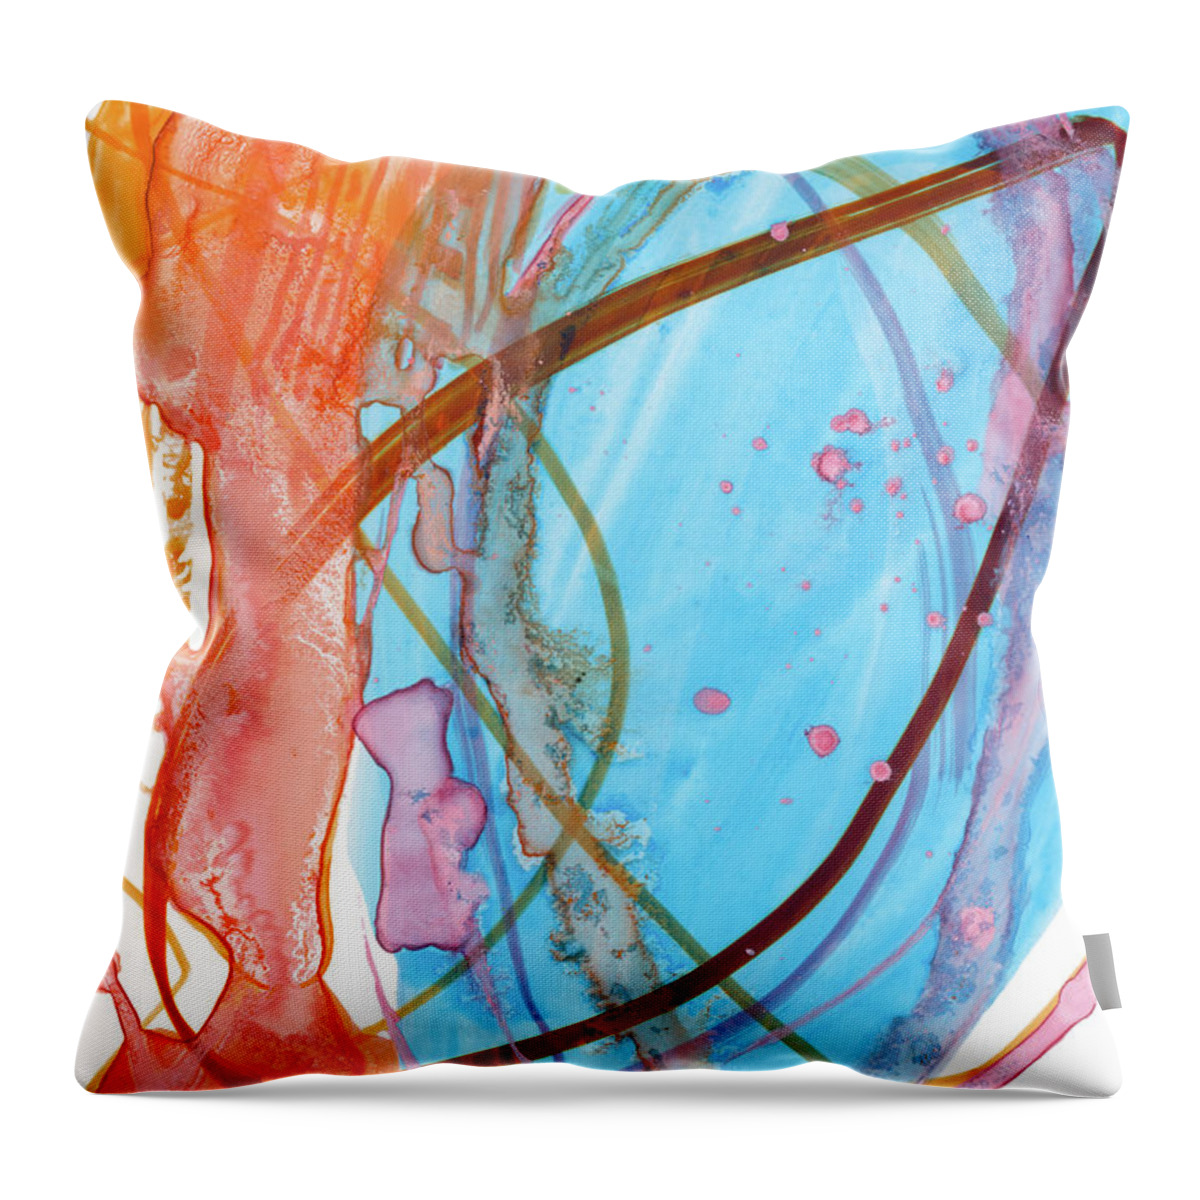 Free Flow Throw Pillow featuring the painting 0054-There Is Room by Anke Classen